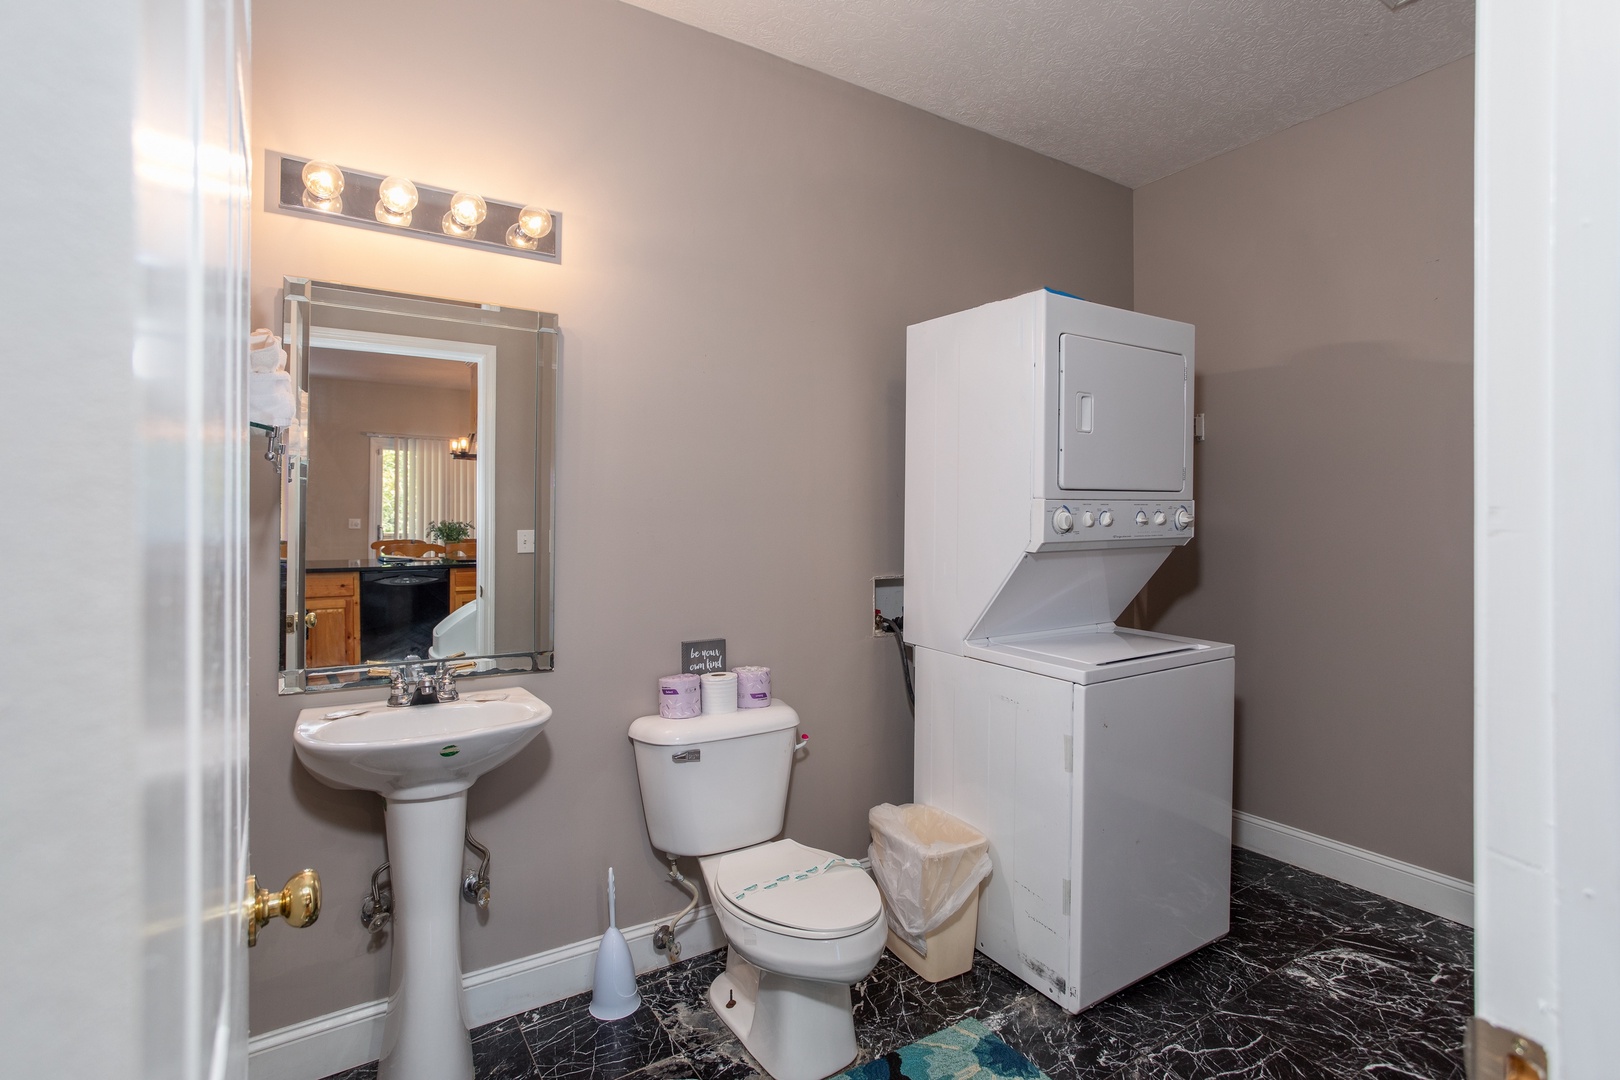 Bathroom with a laundry facility at Into the Woods, a 3 bedroom cabin rental located in Pigeon Forge